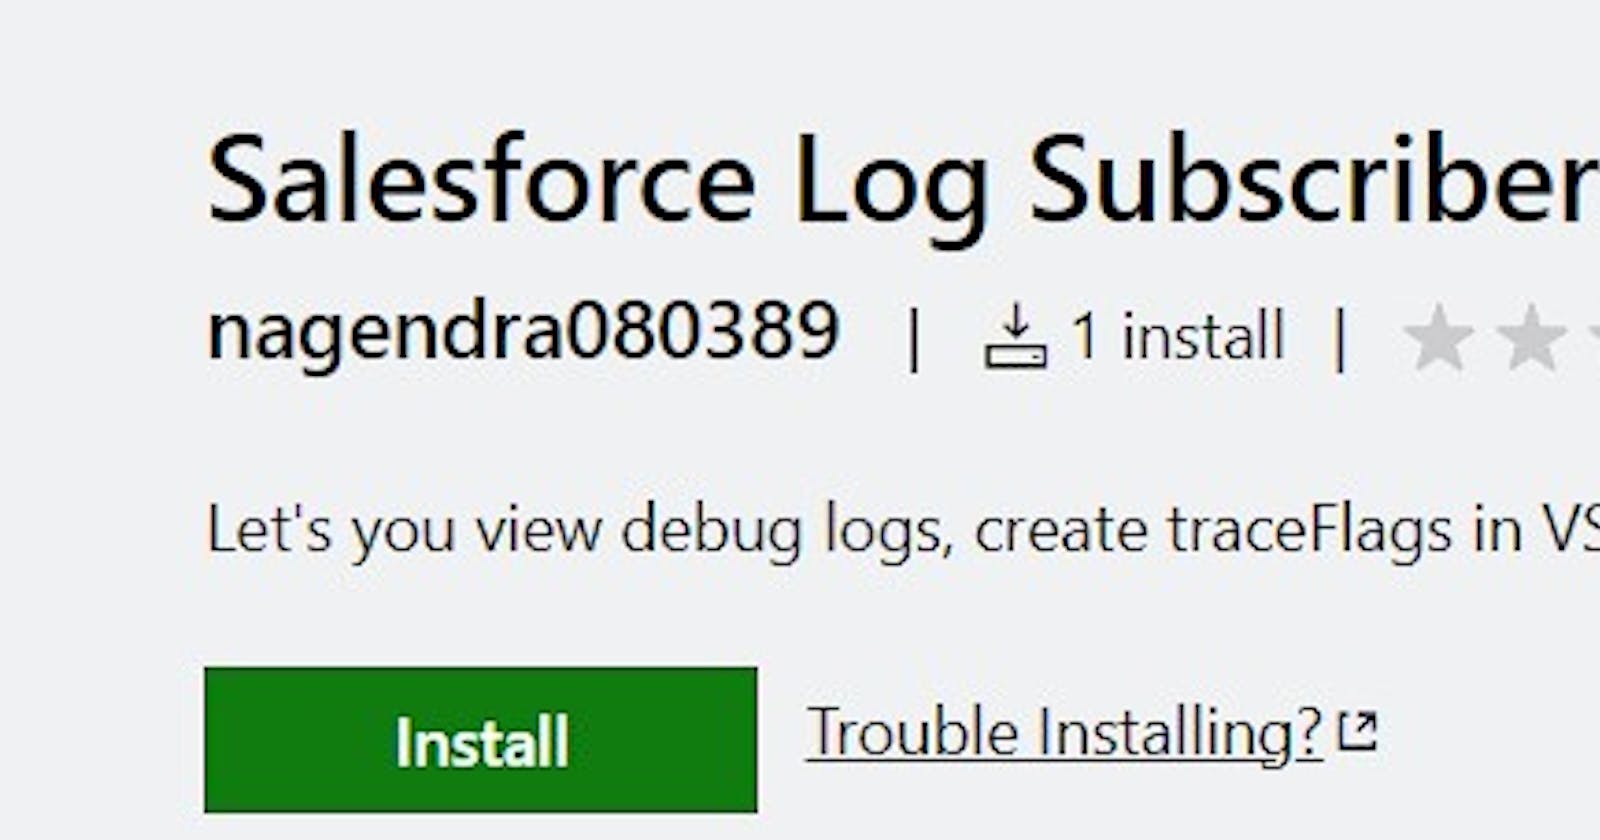 Simplifying Salesforce Debugging with the Salesforce Log Subscriber Extension